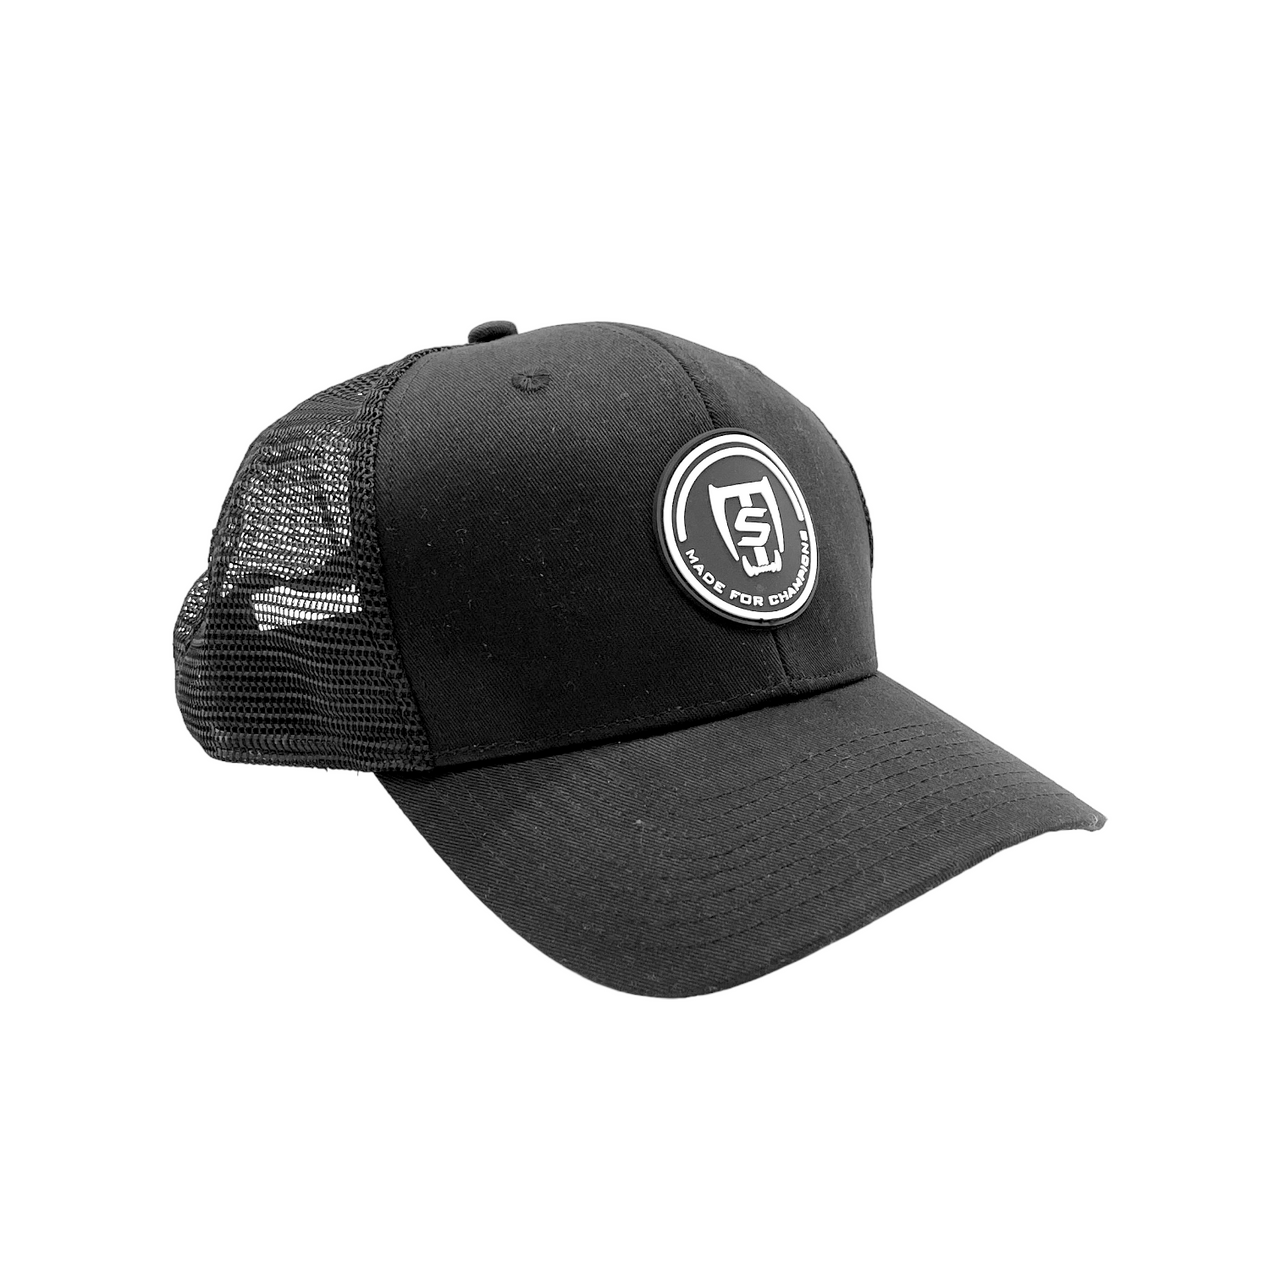 Saber Tactical "Made For Champions" Trucker Cap